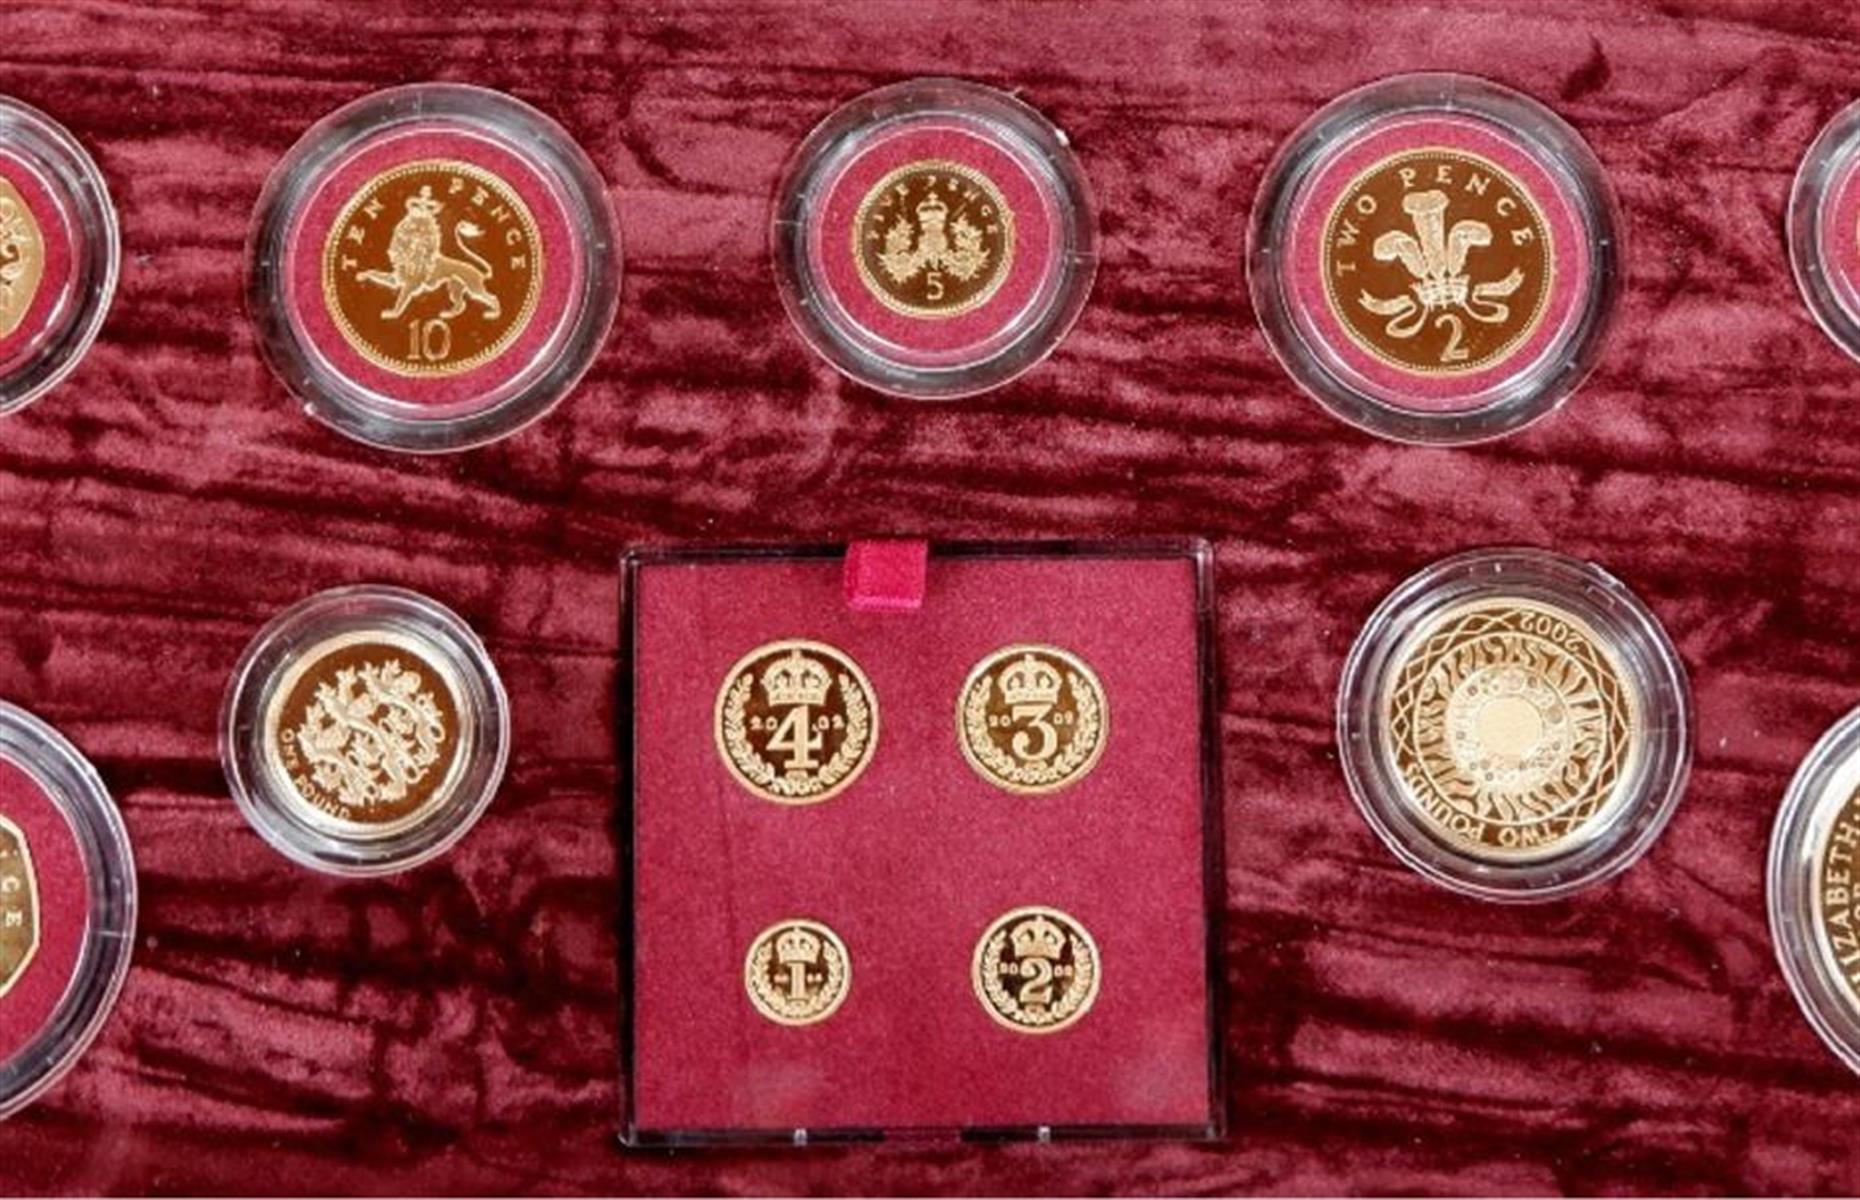 Royal commemorative coins among decay